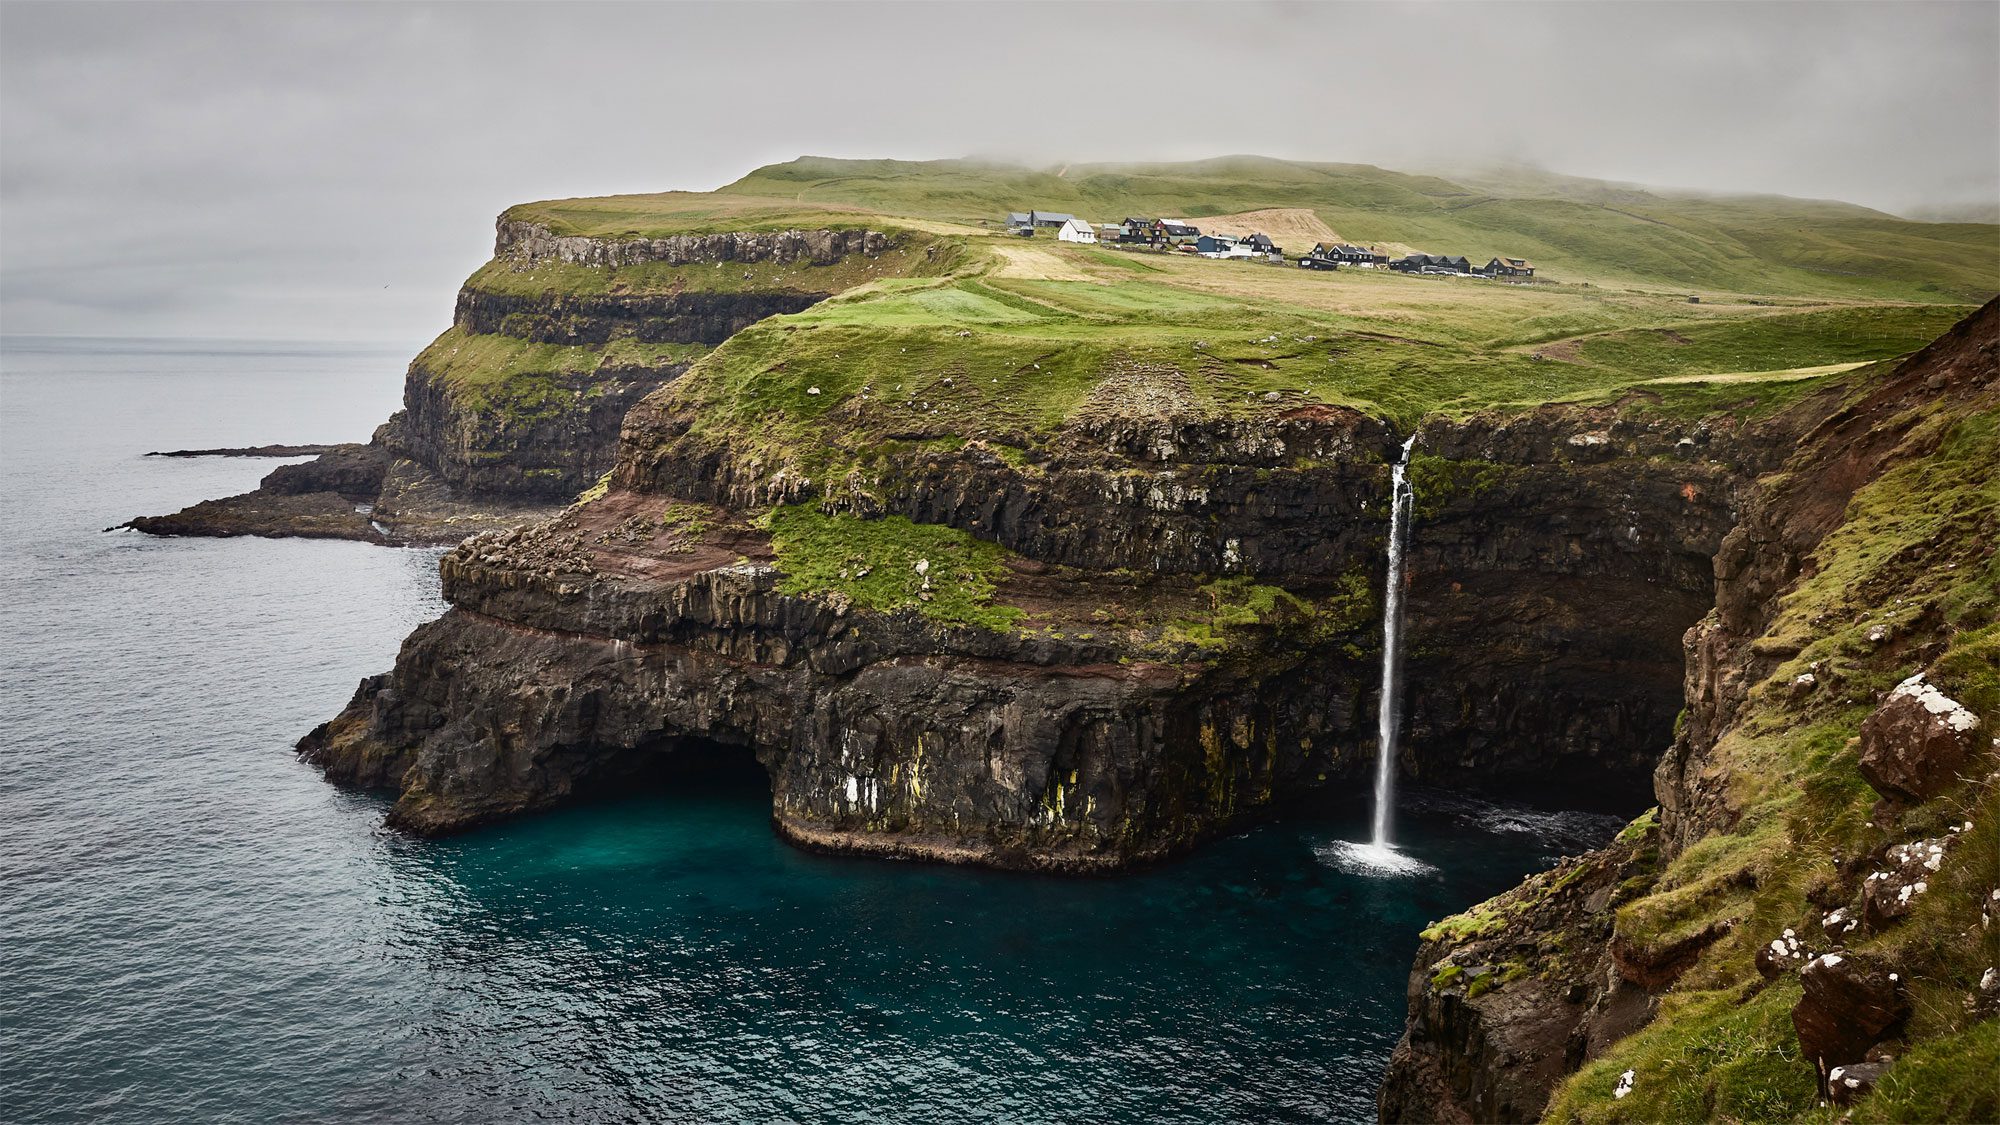 In the rugged Faroe Islands, a filmmaker tells the story of a remote Michelin-starred restaurant